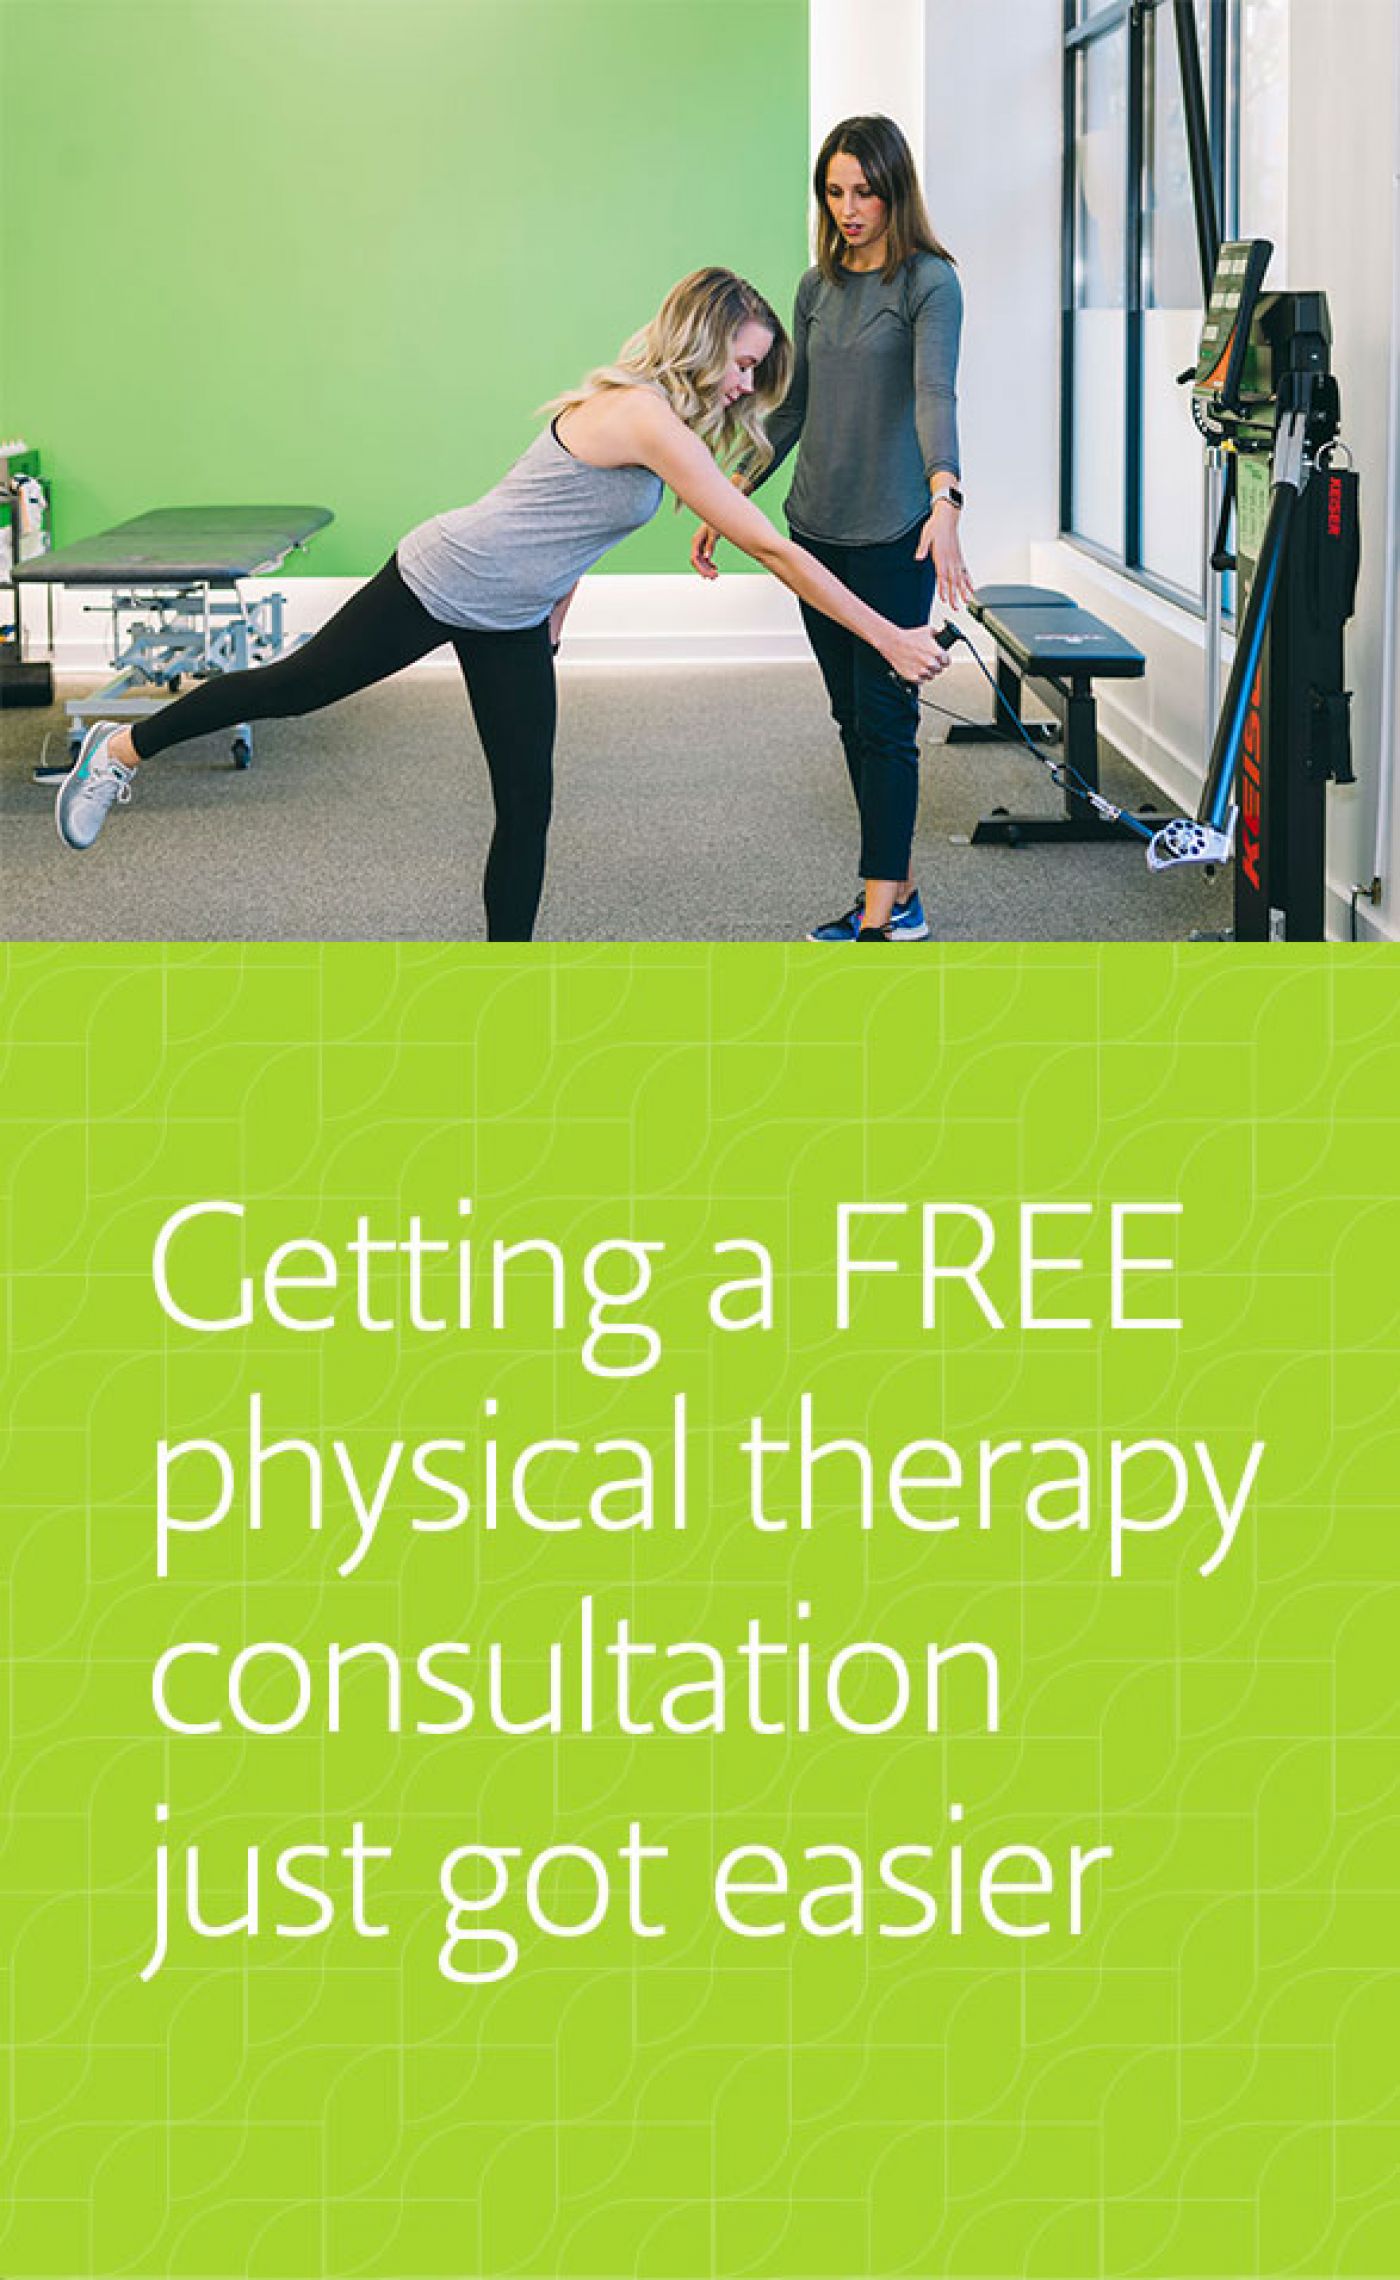 Getting a free physical therapy consultation just go easier